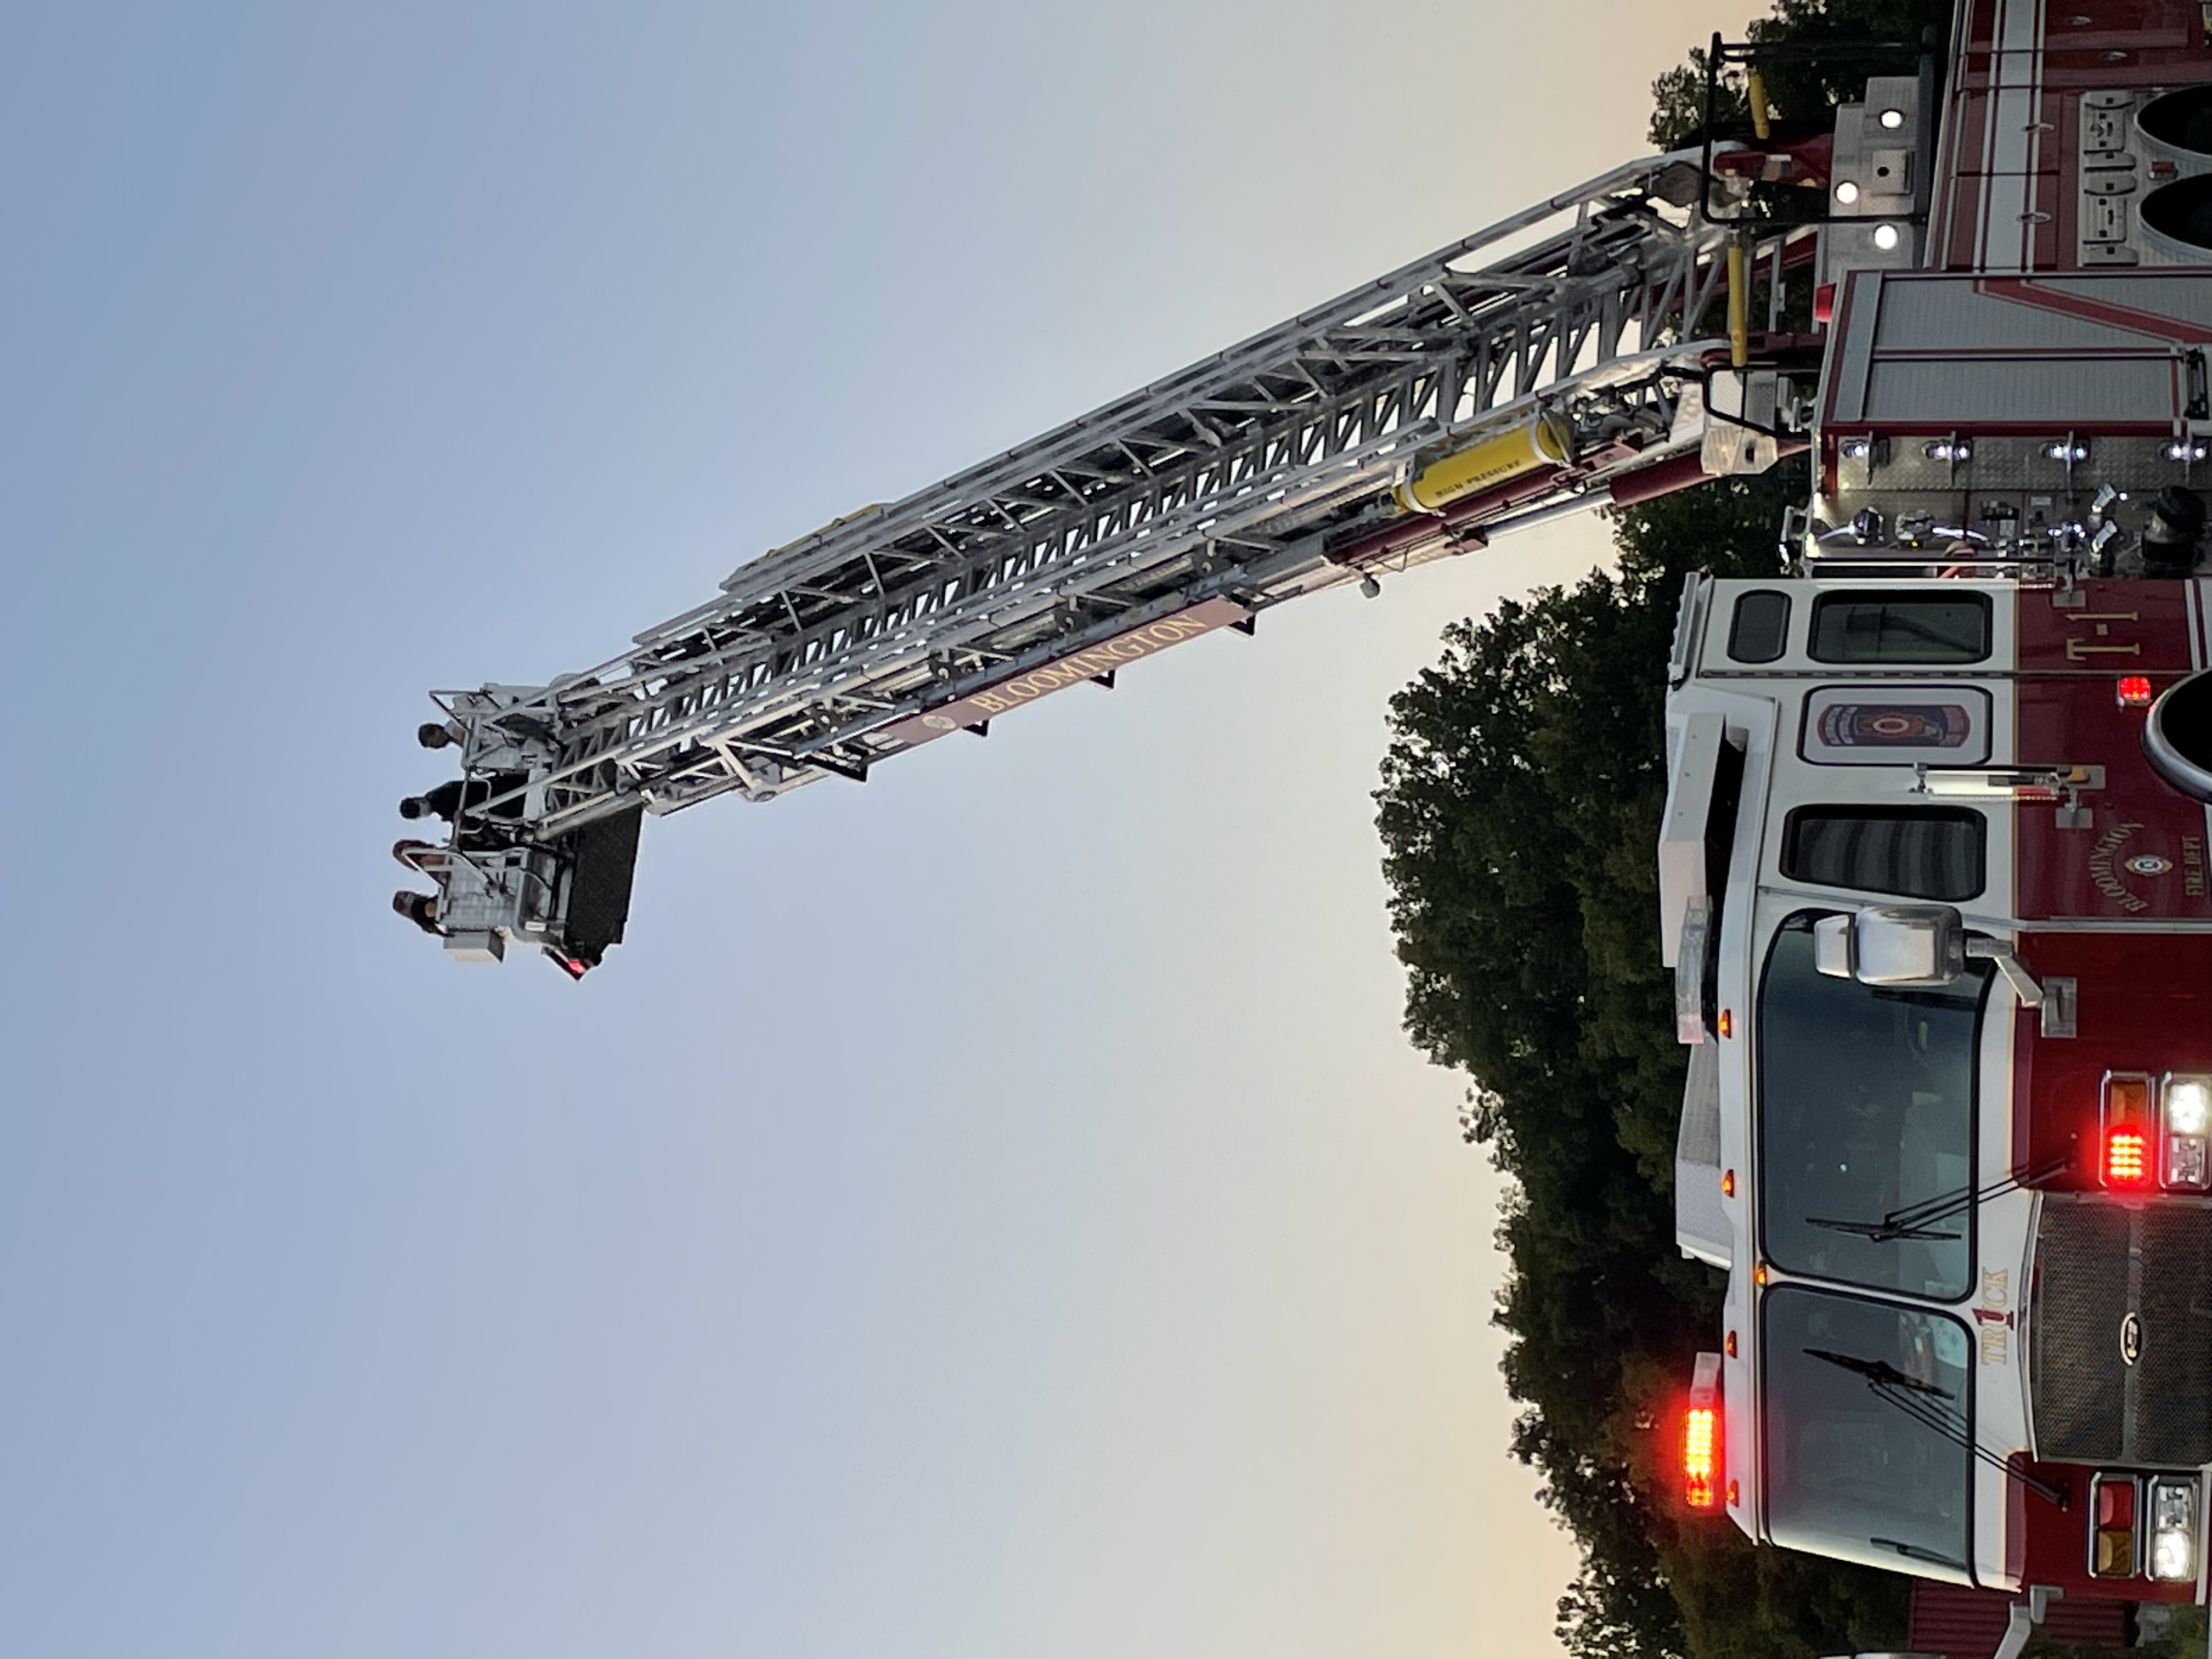 2021 Residents Academy participants ride in the bucket of the 100' aerial ladder truck